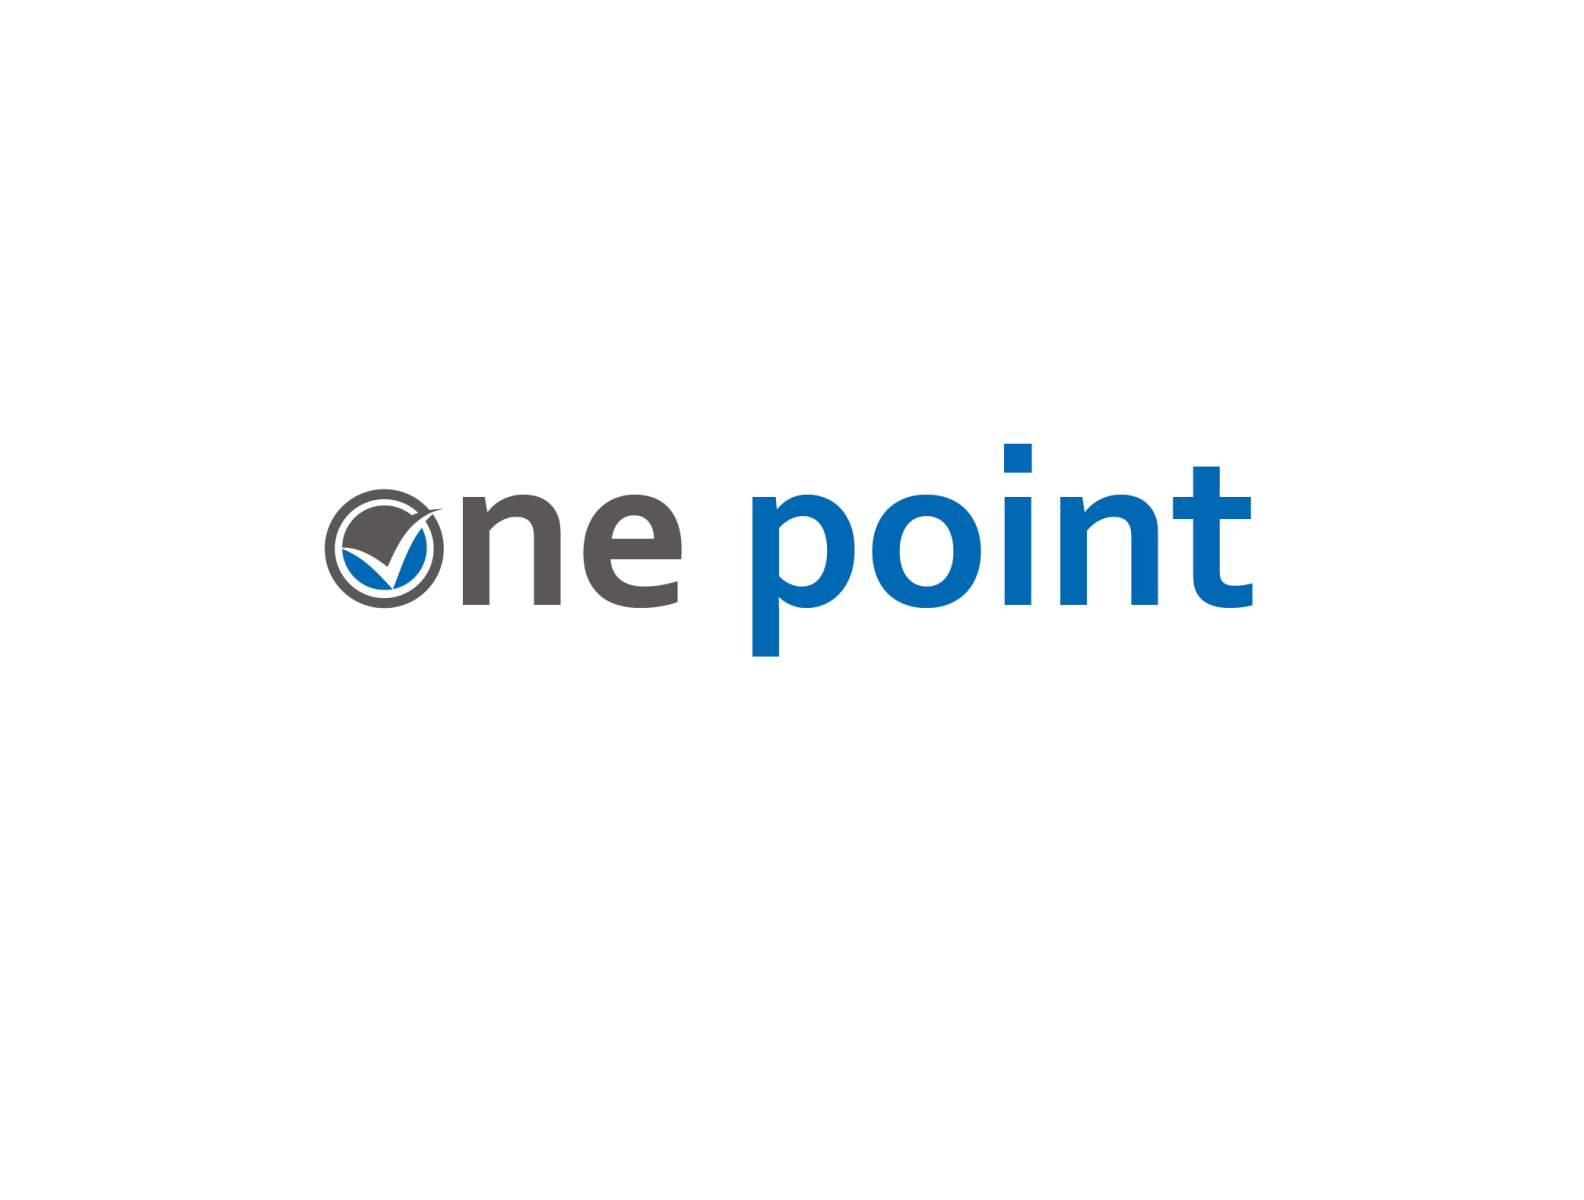 one point logo concept by Beniuto Design on Dribbble